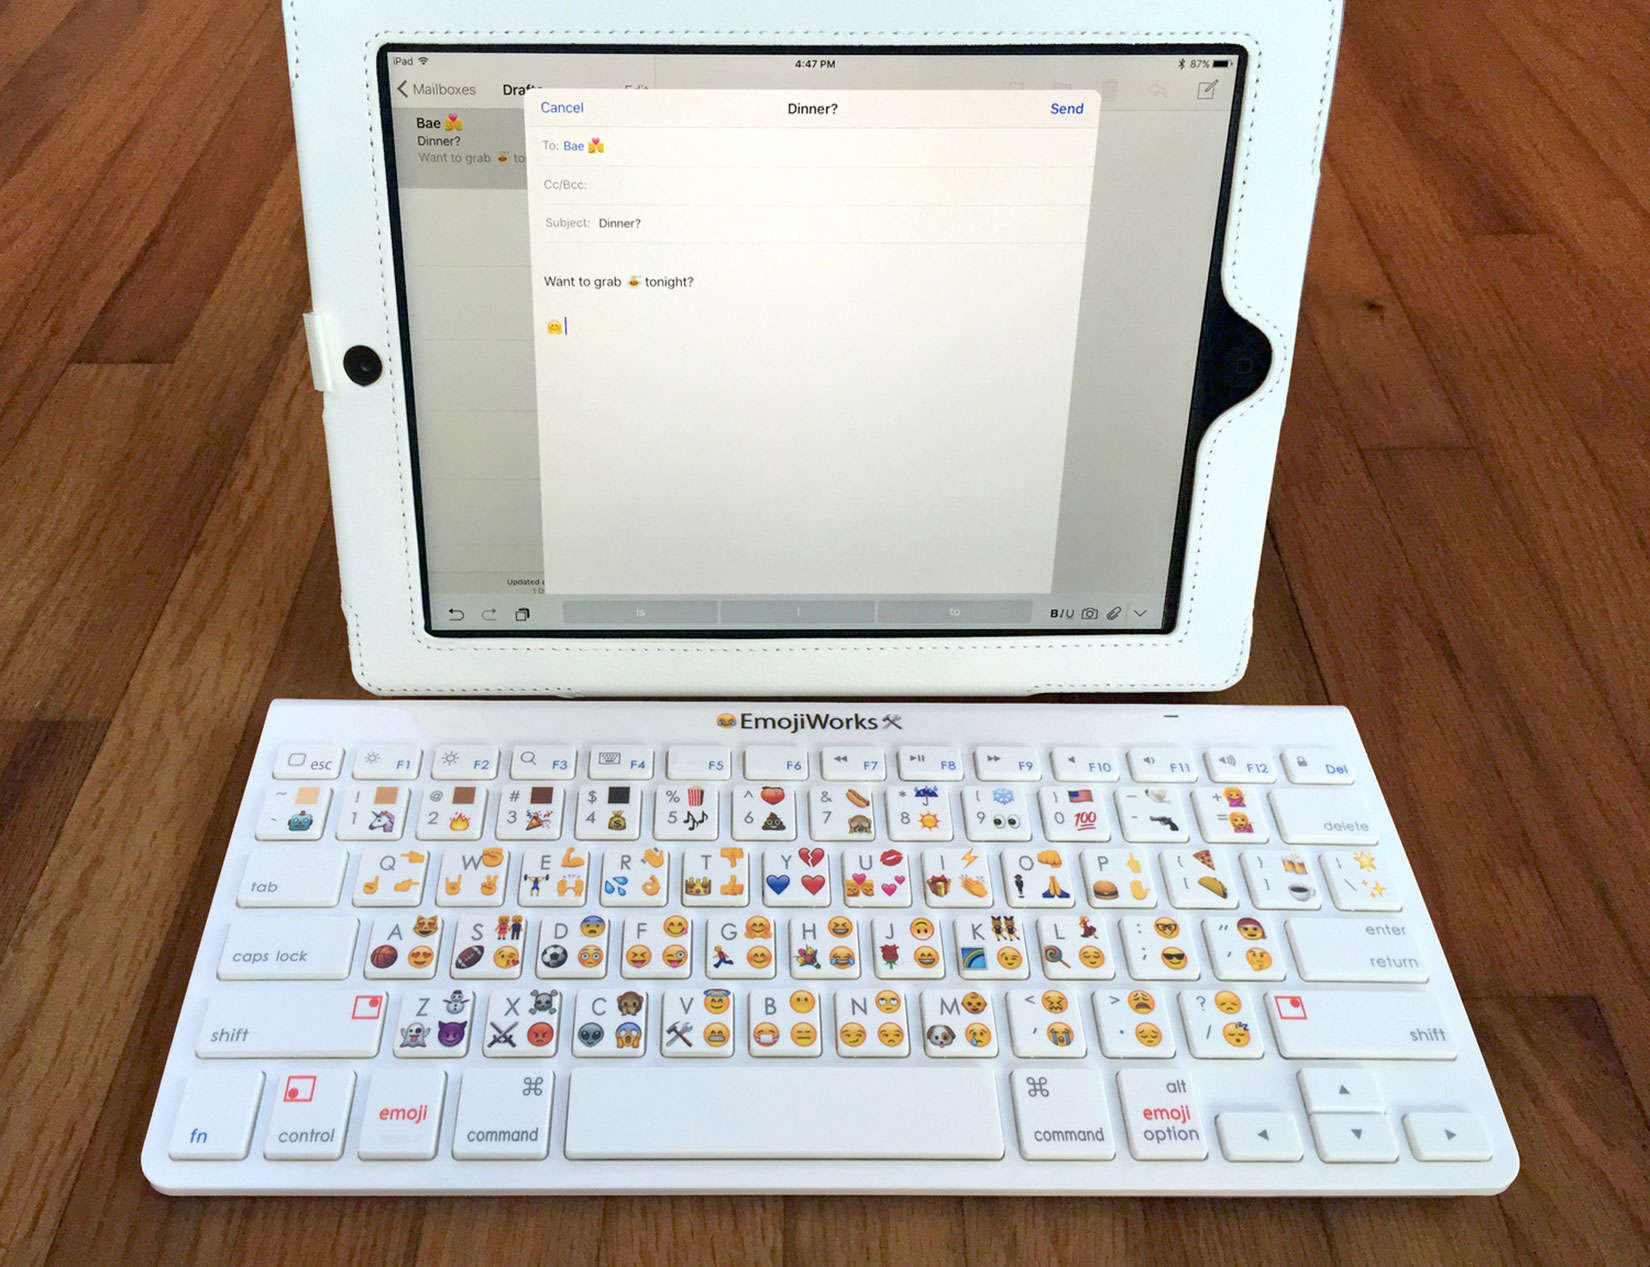 The emoji keyboard in action with an iPad.